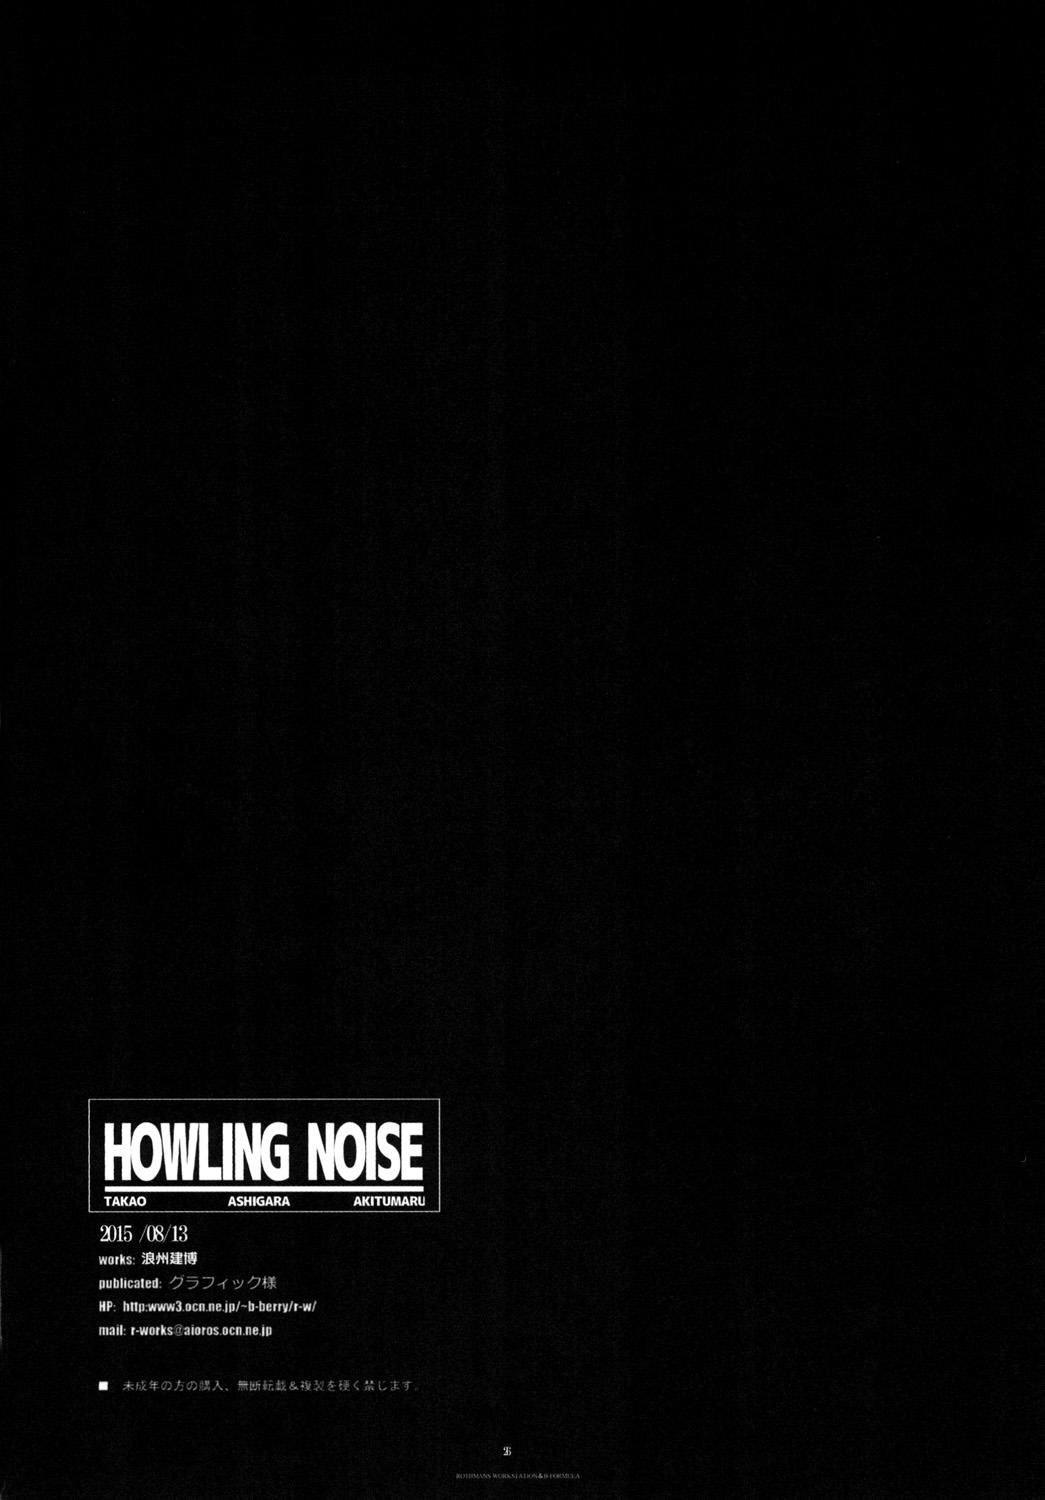 Howling Noise 25